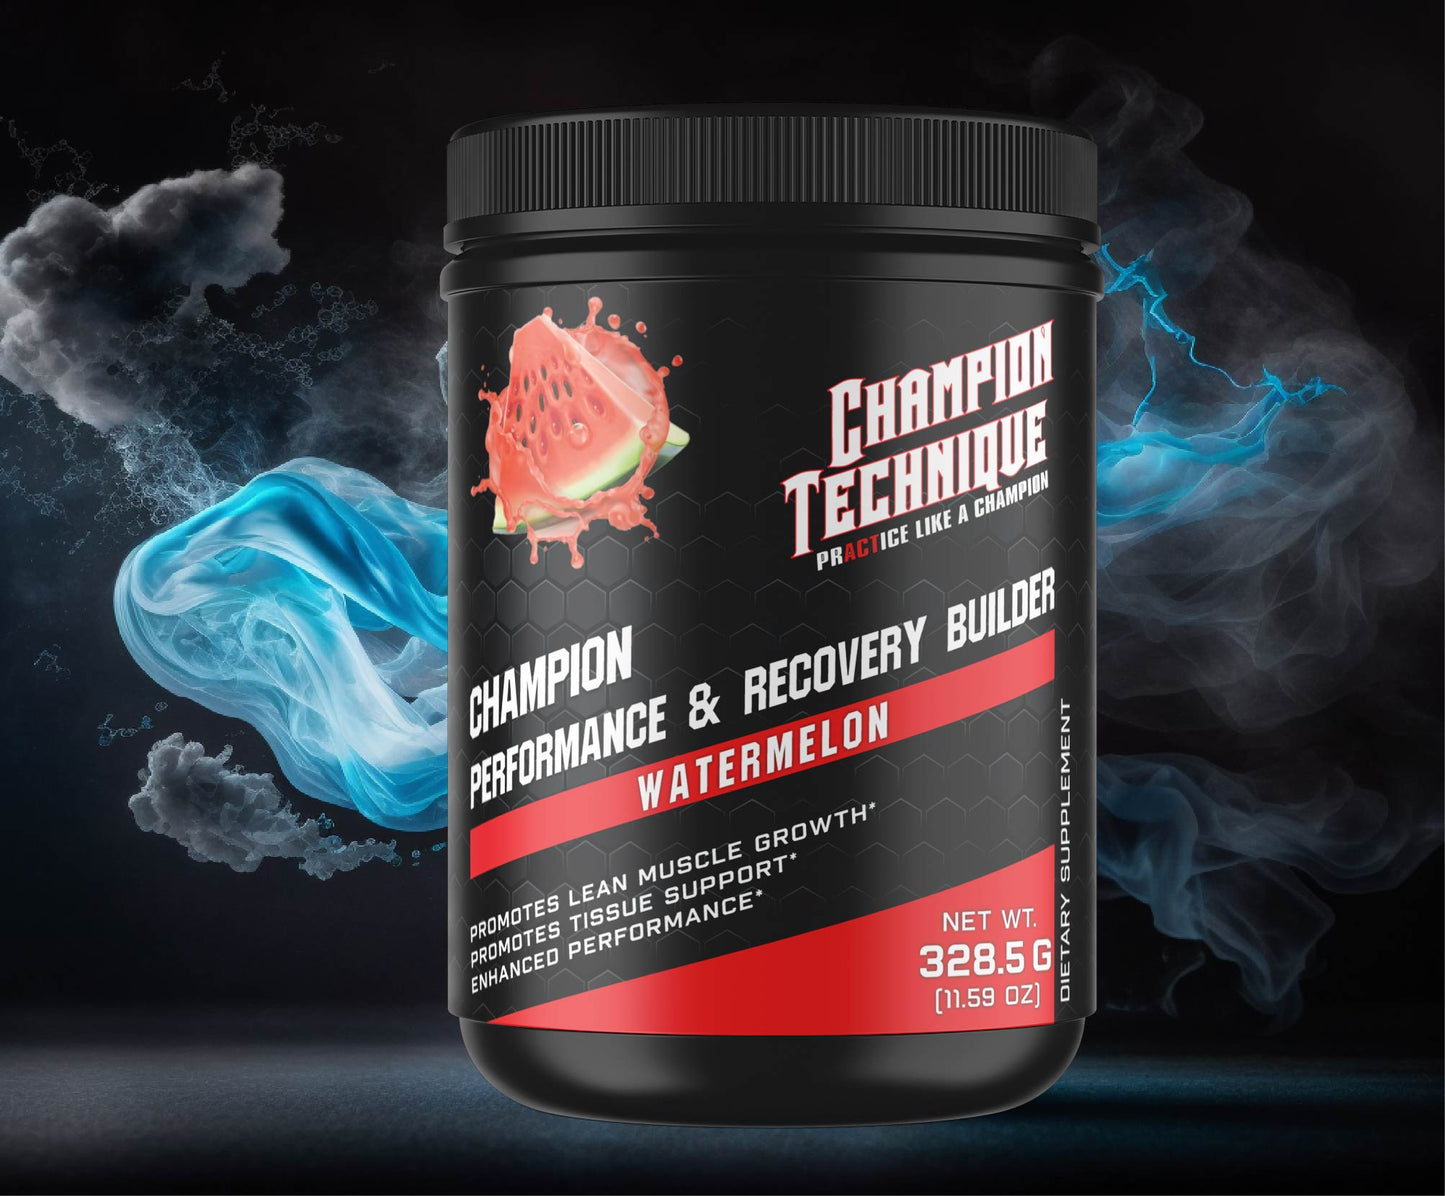 Champion Performance and Recovery Builder Watermelon (BCAA)